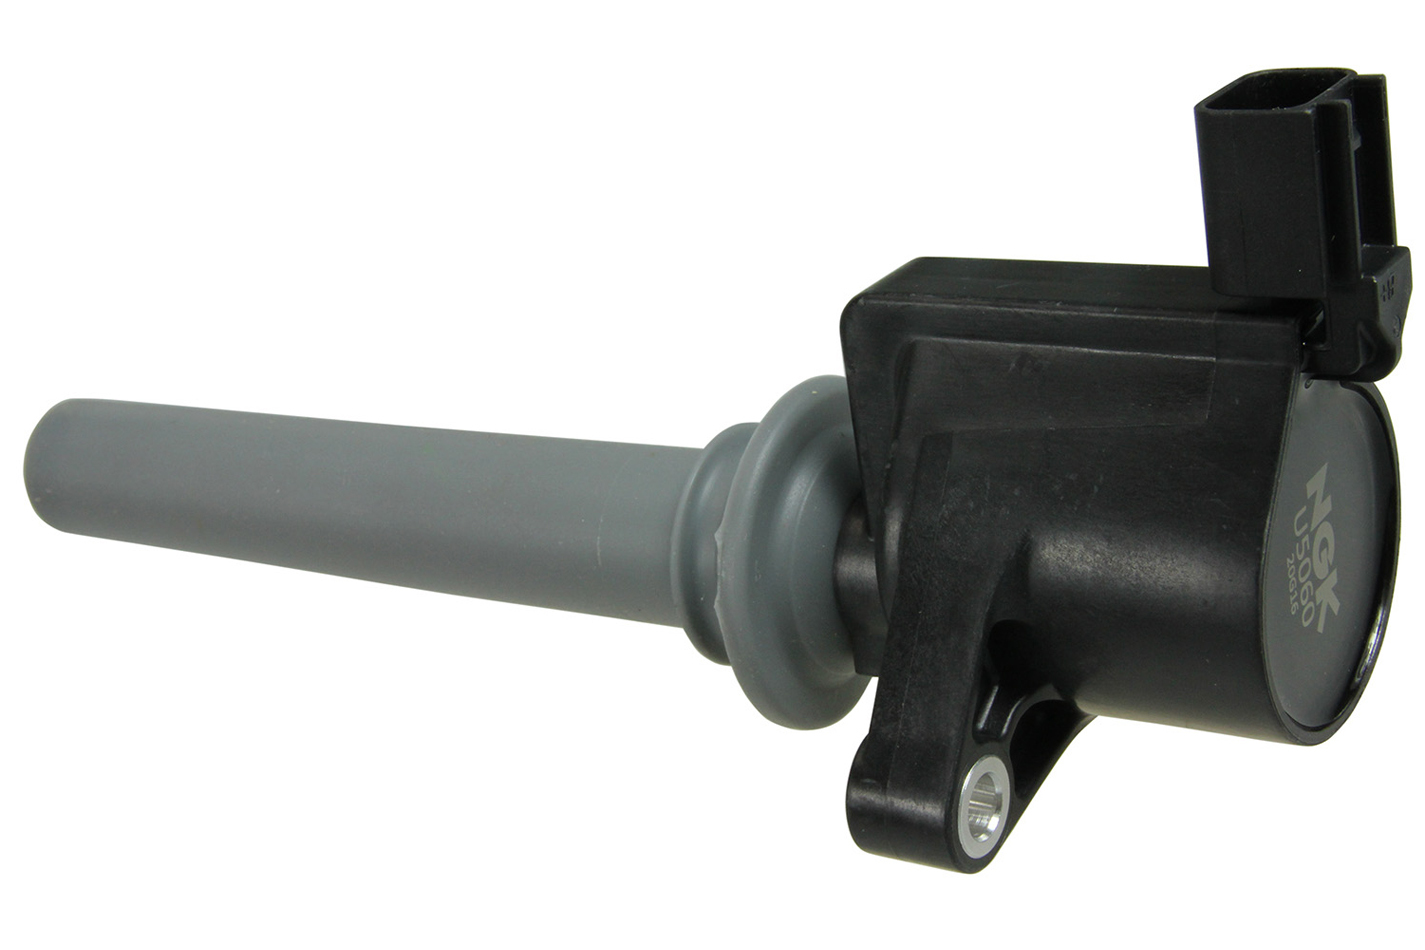 NGK COP Ignition Coil Stock # 48680